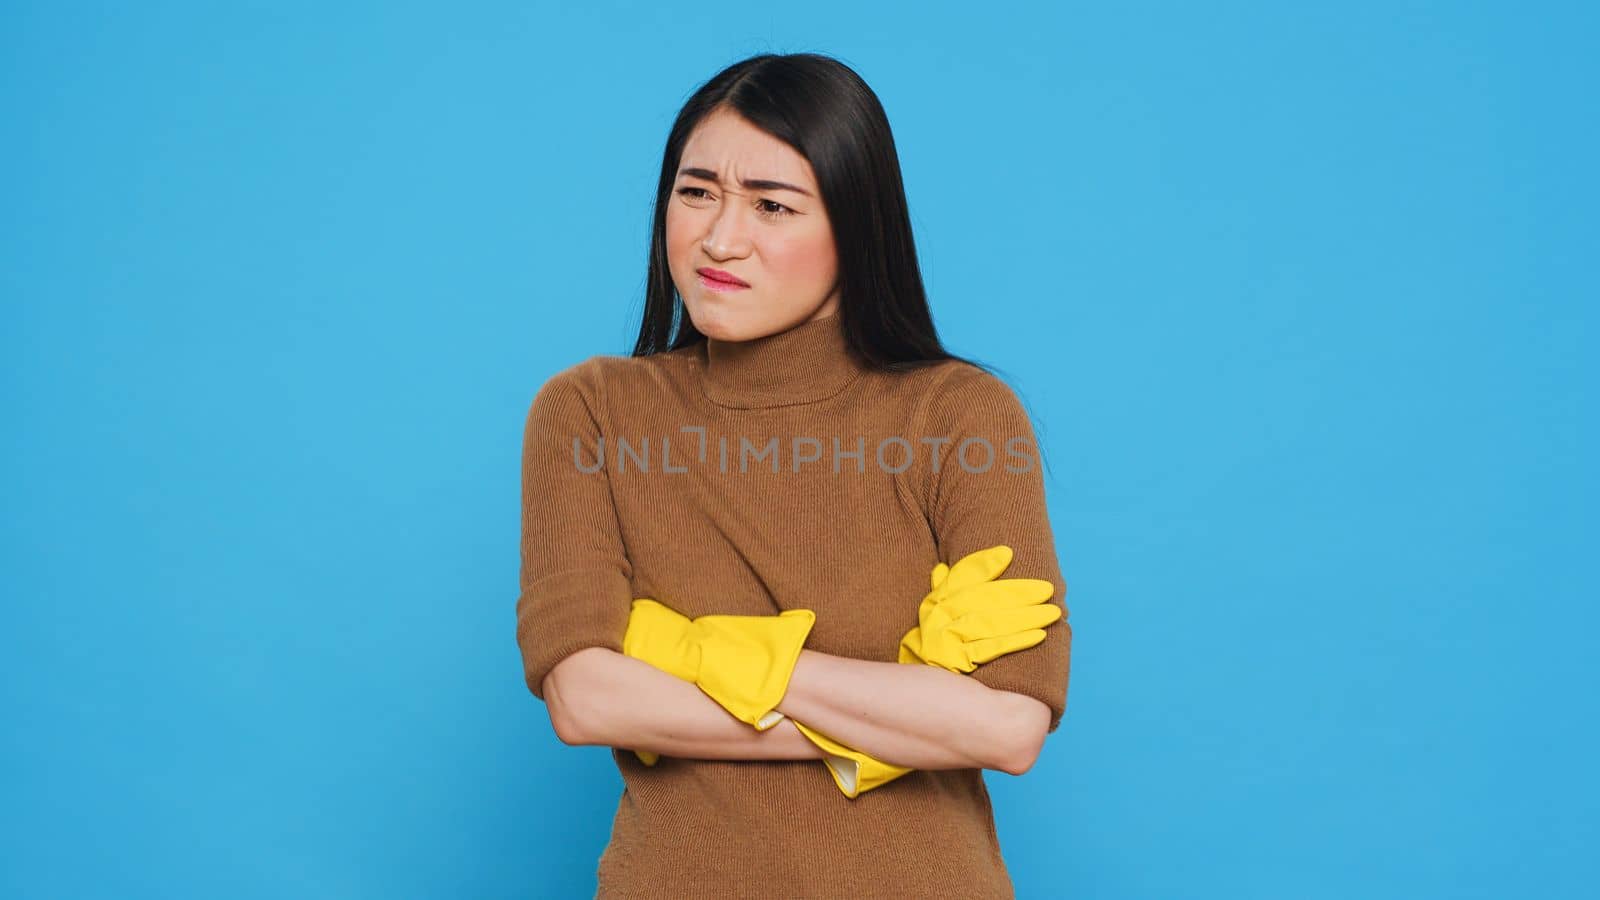 Nervous professional cleaner with protective yellow gloves having problem with house cleaning, standing with arm crossed in studio over blue background. Housekepper having negative expression